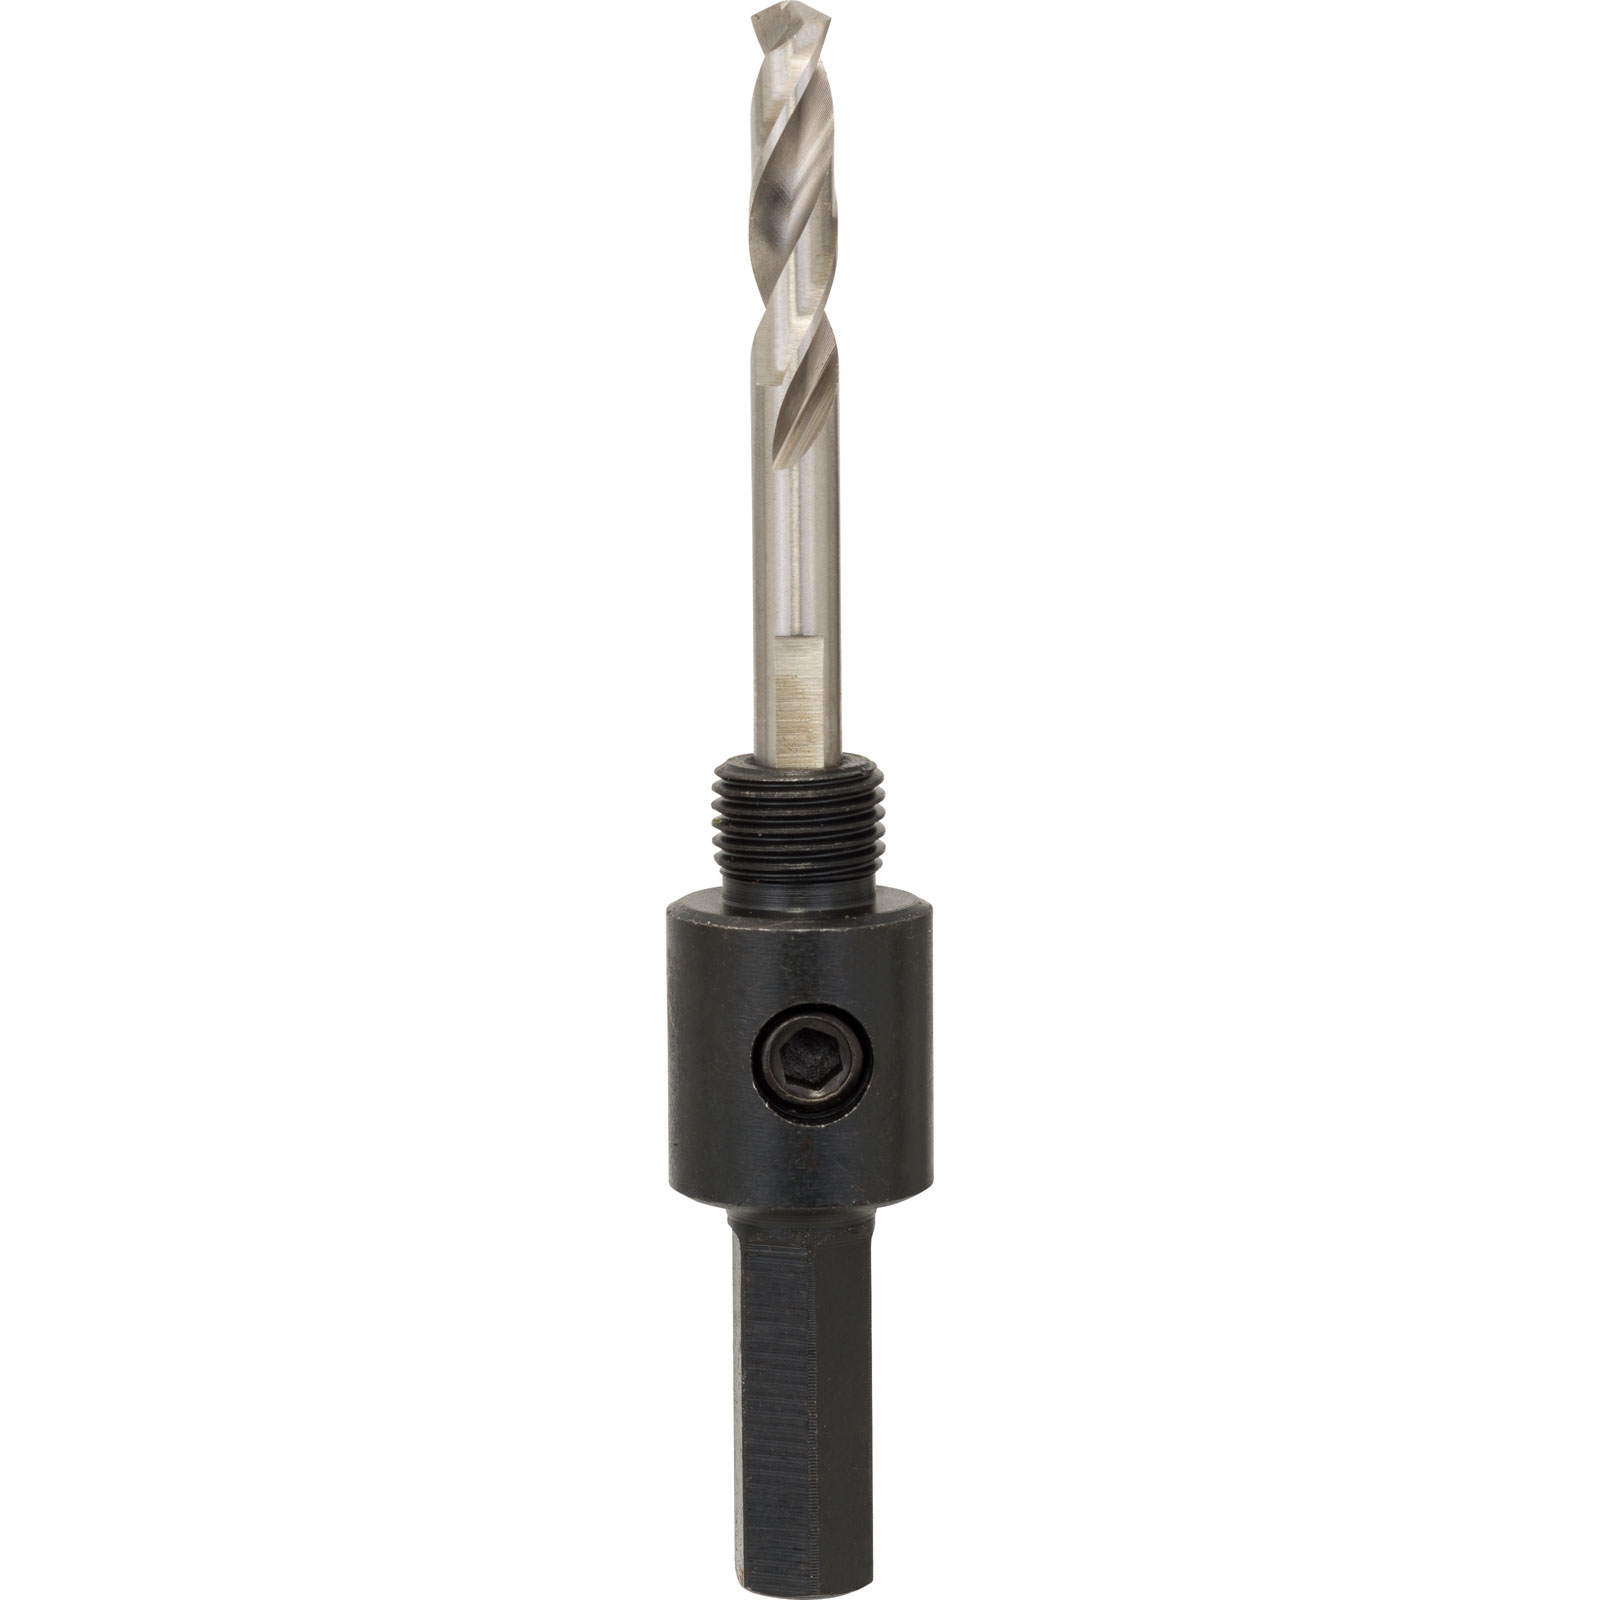 Photo of Bosch Hex Shank Arbor For 14 - 30mm Hole Saws